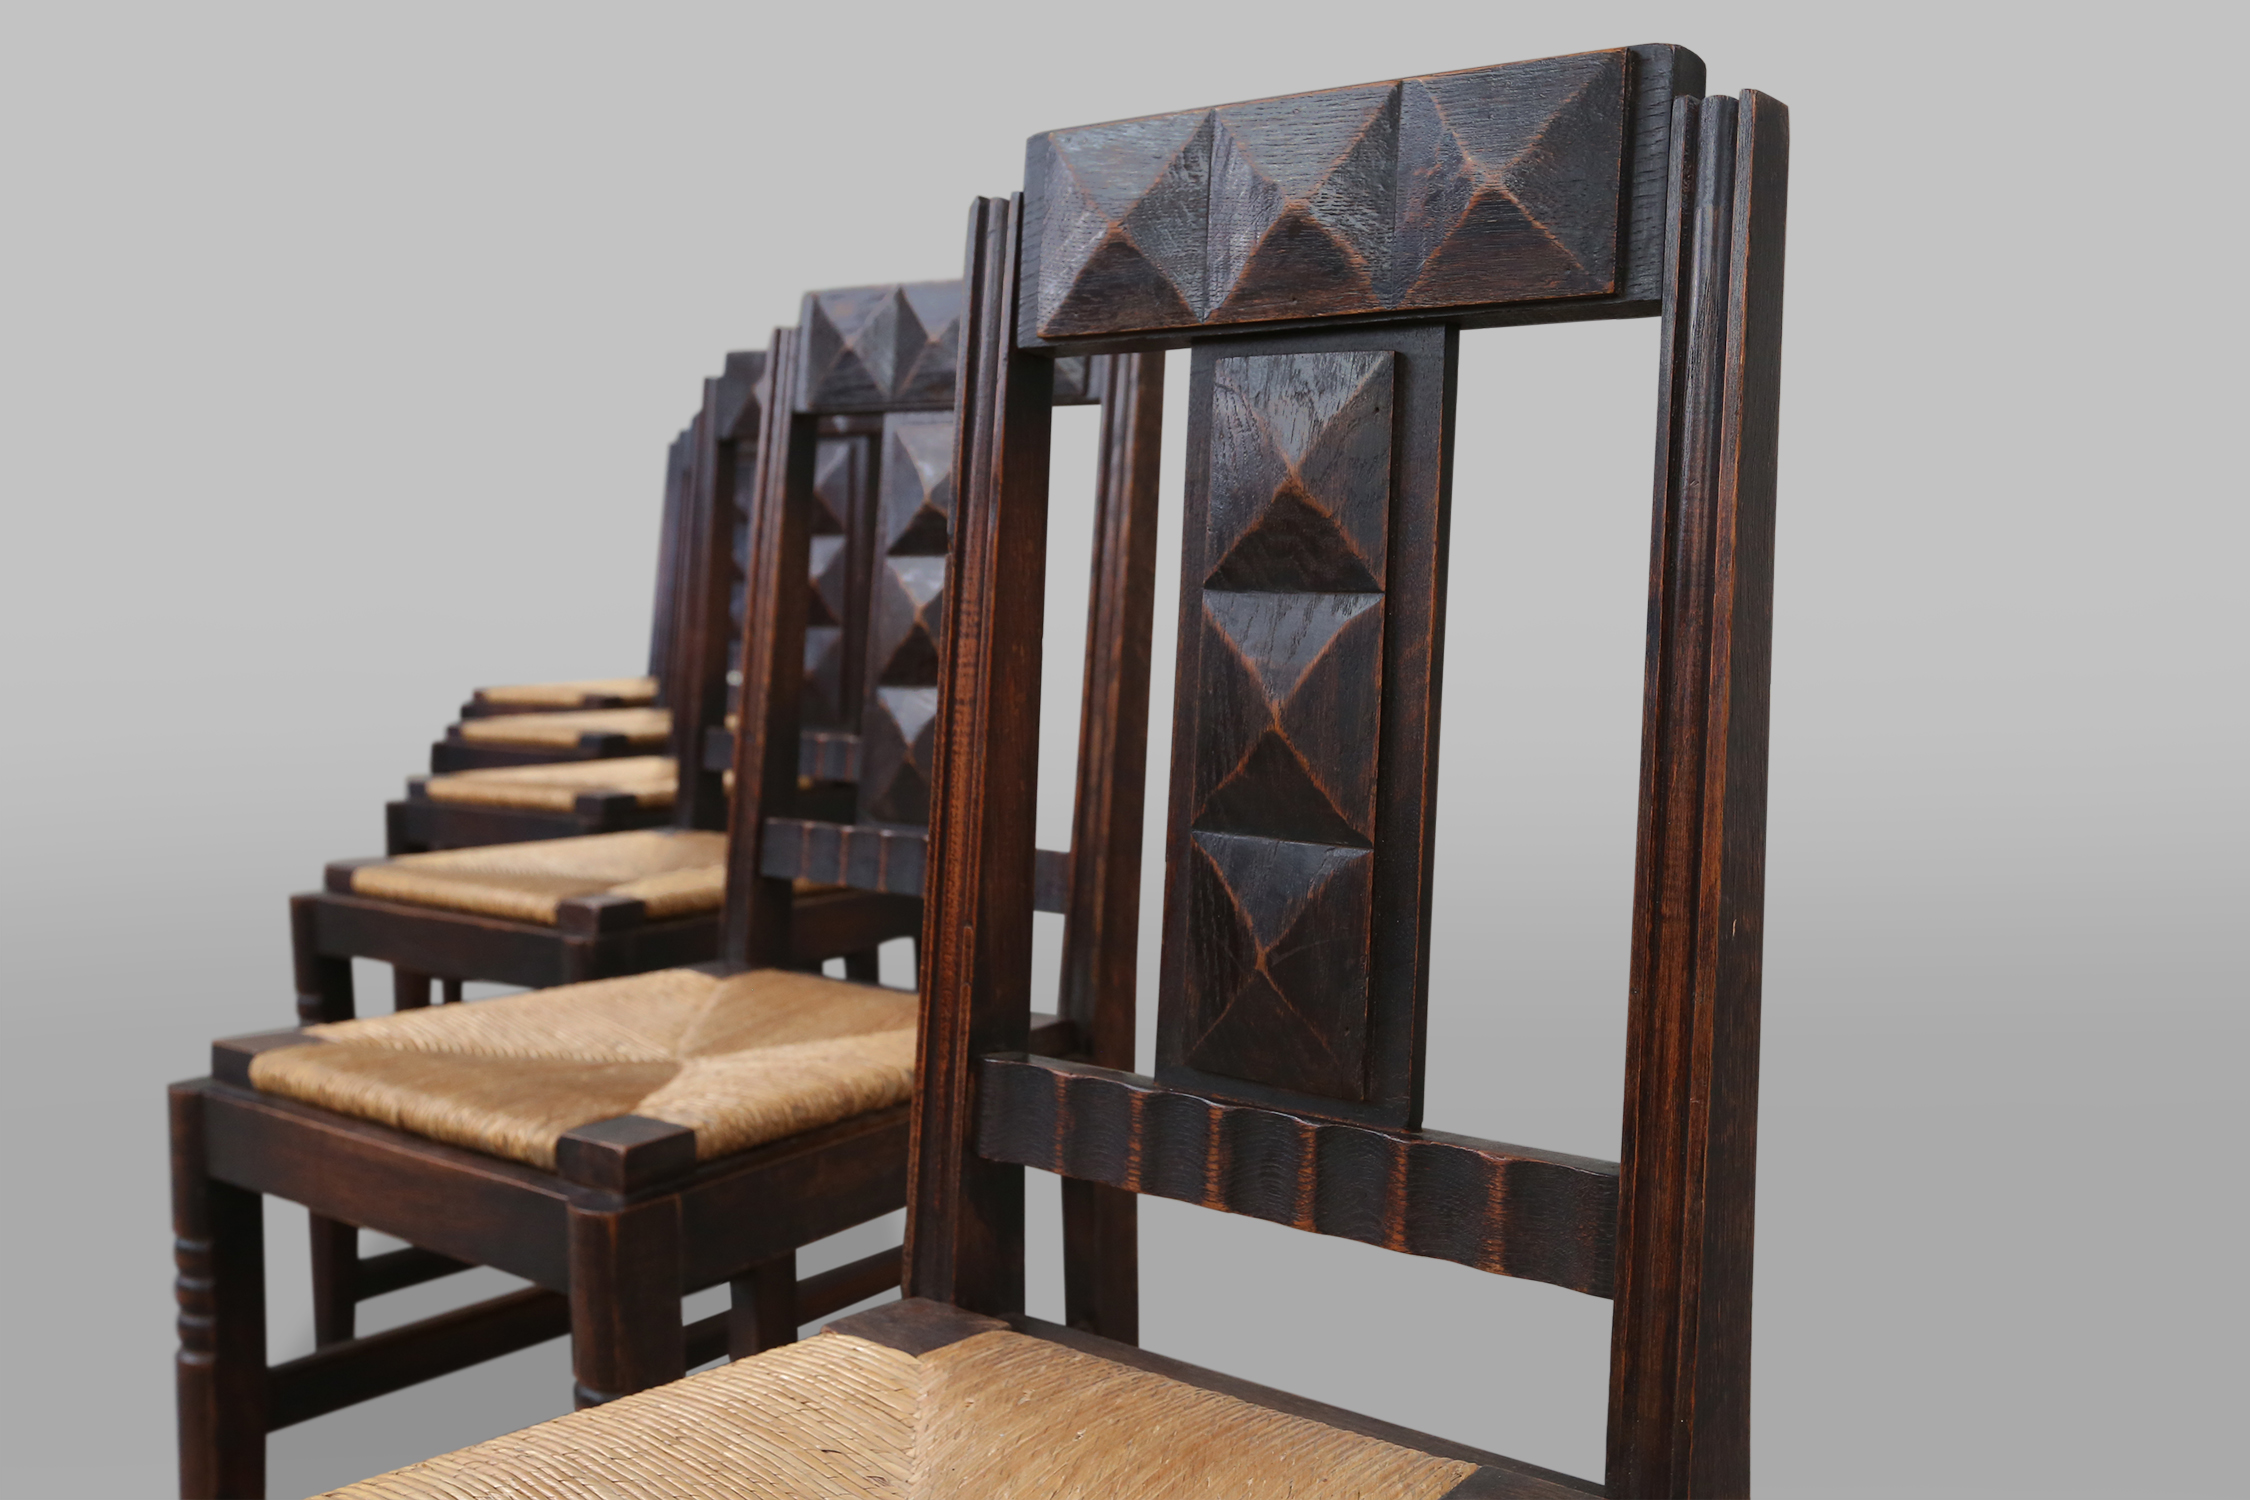 set of oak and wicker dining chairs by Victor Courtray